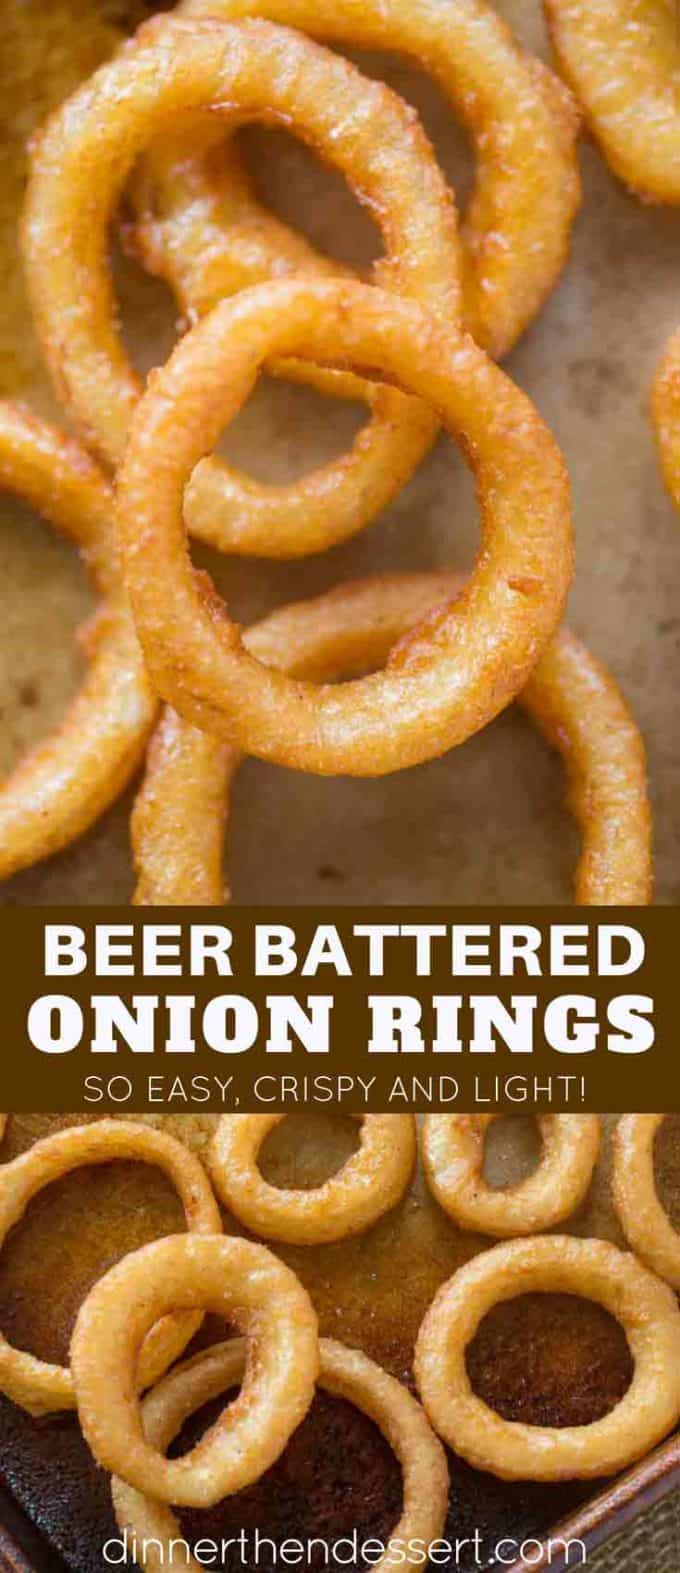 Beer Battered Onion Rings with Buttermilk